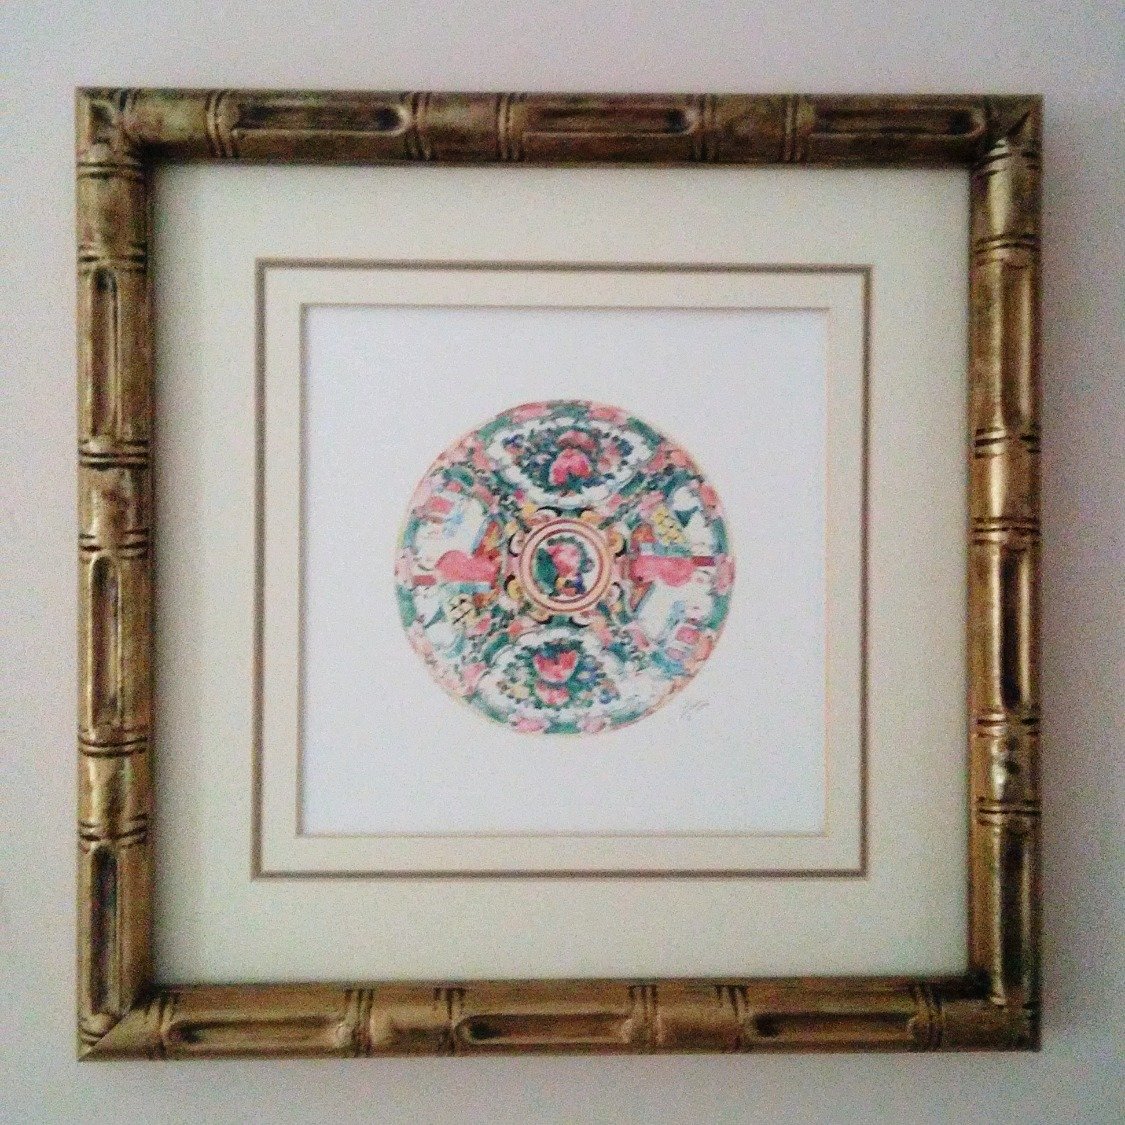 Rose Medallion Watercolor Giclée Print Matted in Gold Faux Bamboo Frame by Letterworth